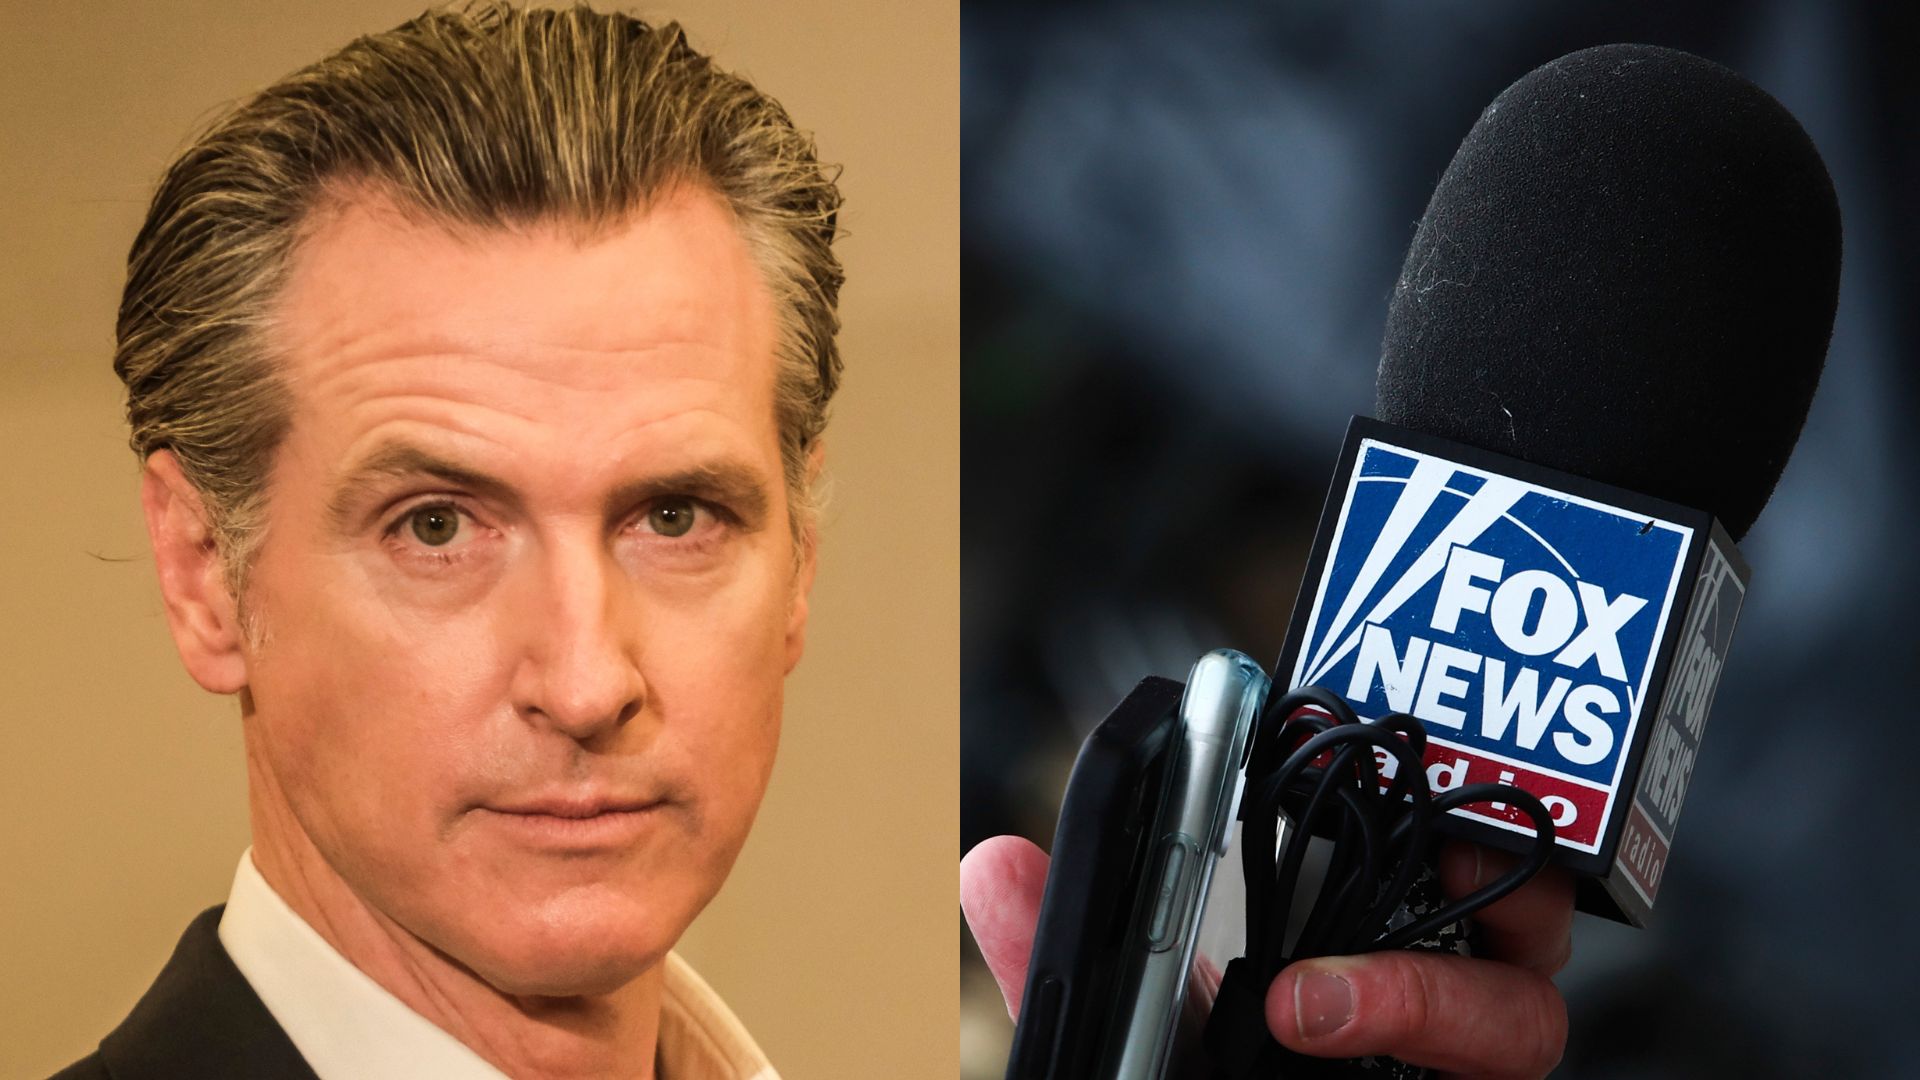 Gavin Newsom Calls Fox News ‘Quite Literally Bullsh*t and Misinformation’ — Although He Reportedly Watches Network Religiously (mediaite.com)